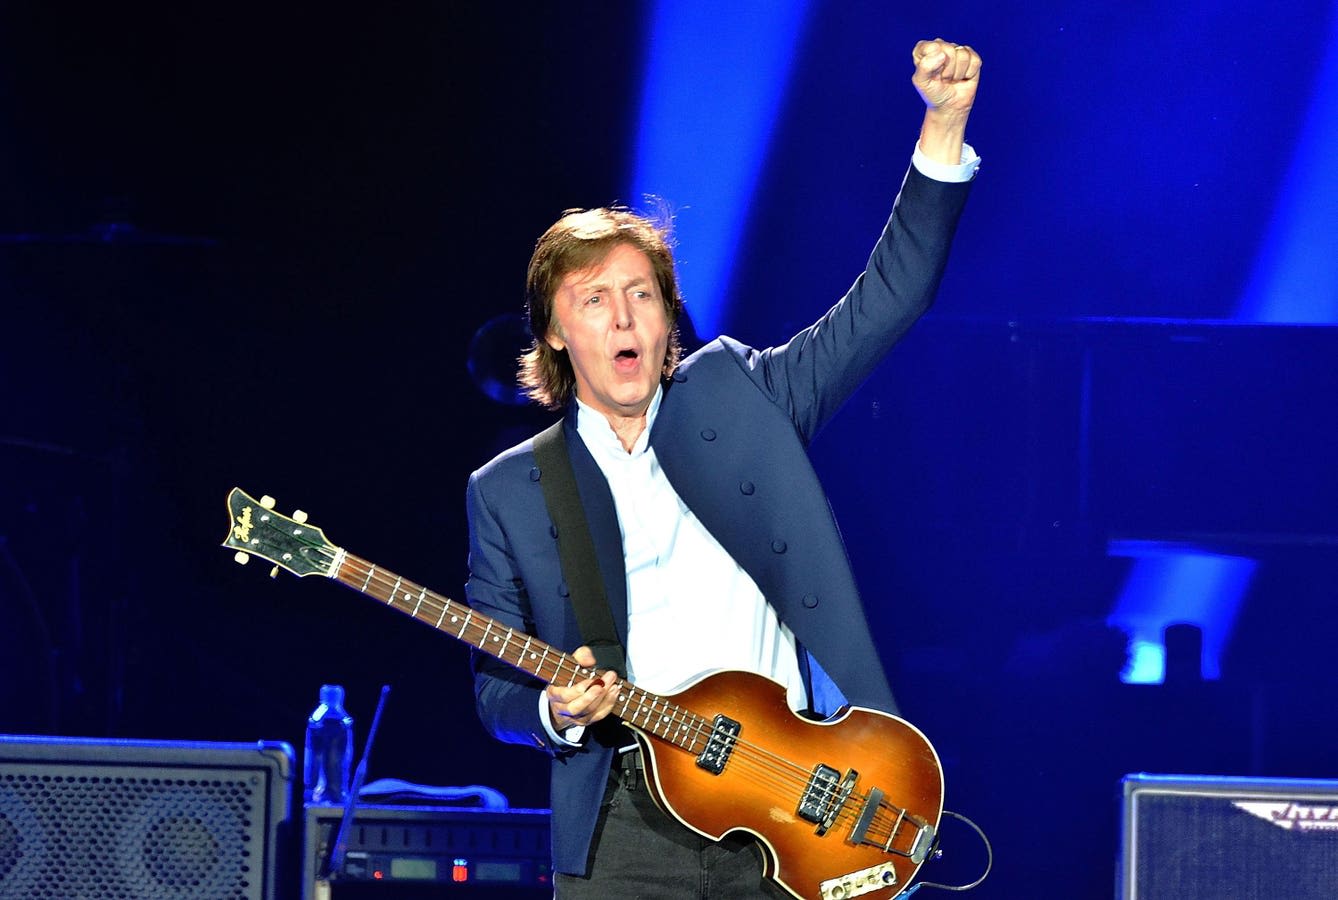 Paul McCartney Misses Out On One Of The Biggest Awards Of His Career